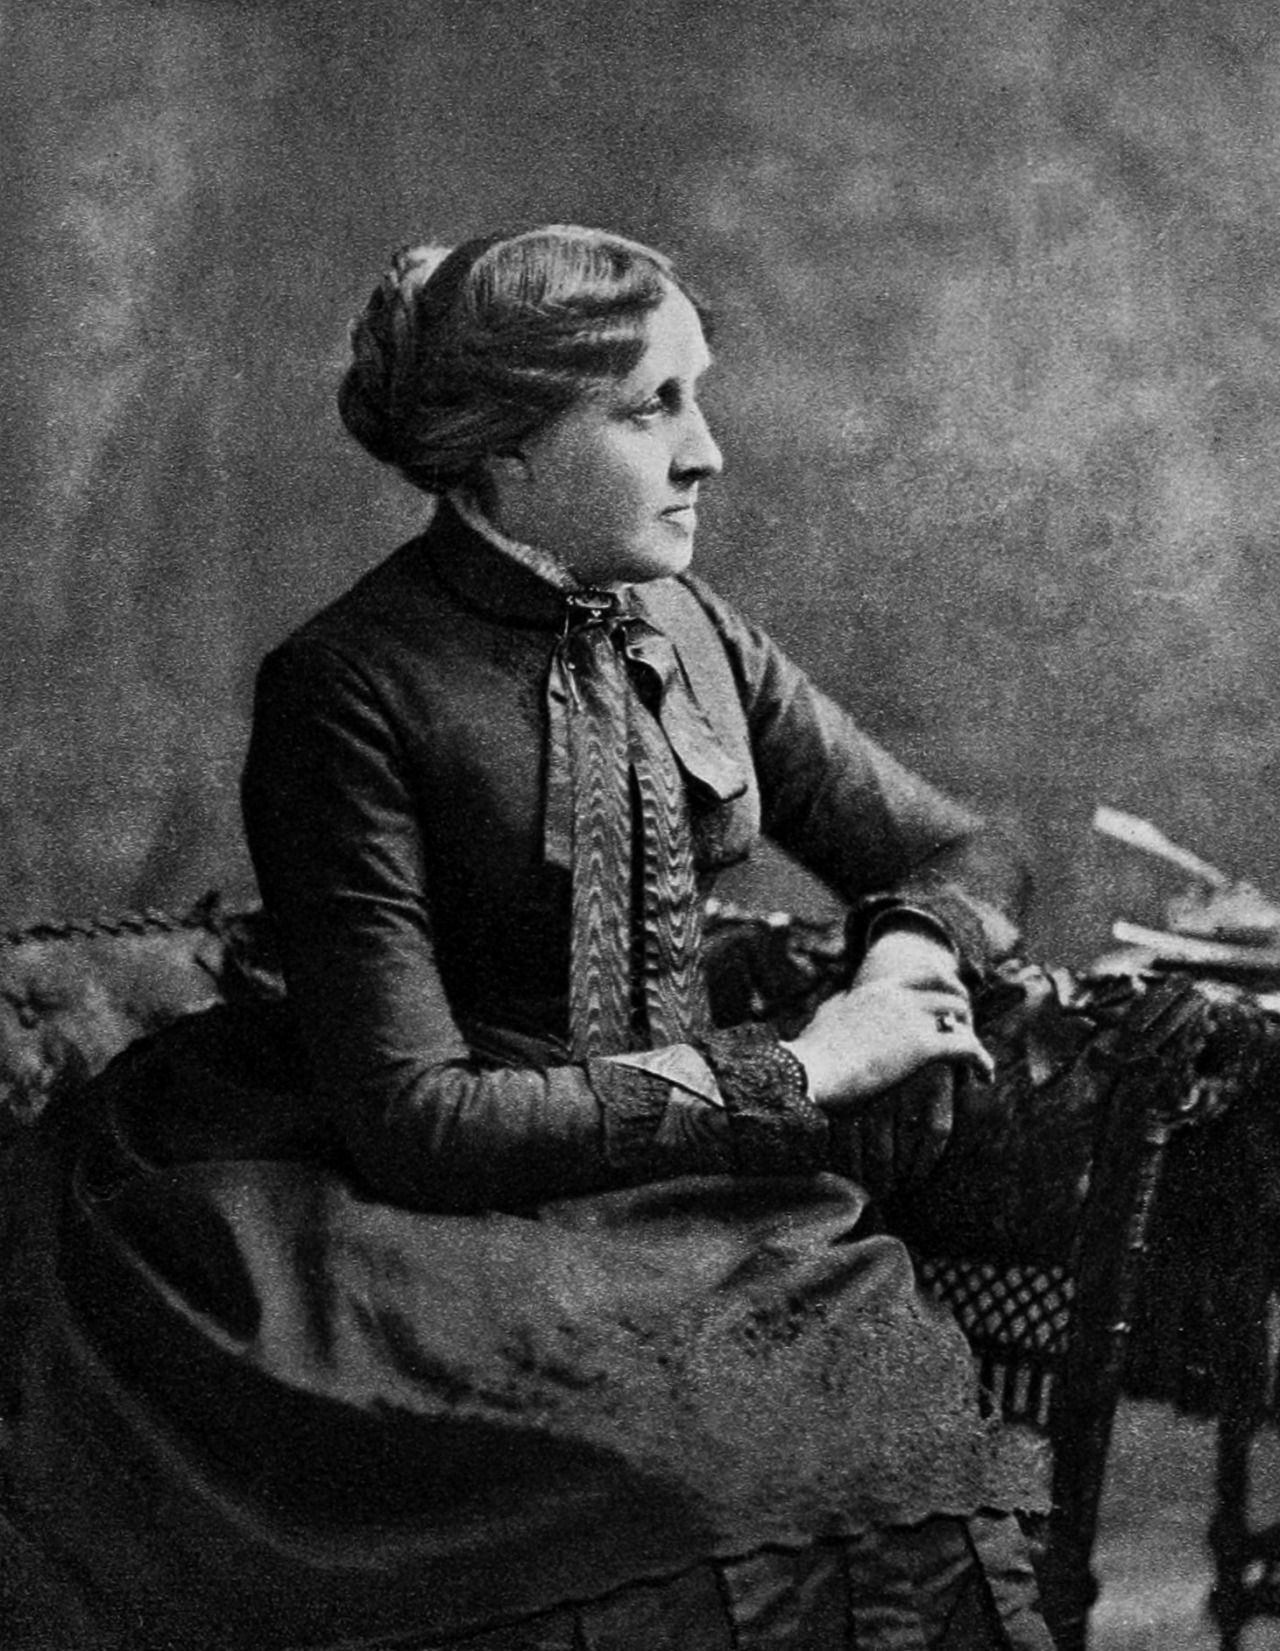 If youre a fan of Little Women, get excited - our episode on author Louisa May Alcott is coming out tomorrow!  [Image: Studio portrait of Louisa May Alcott] #louisa may alcott #little women#queer history#lgbt history#lgbt#lgbtq#queer